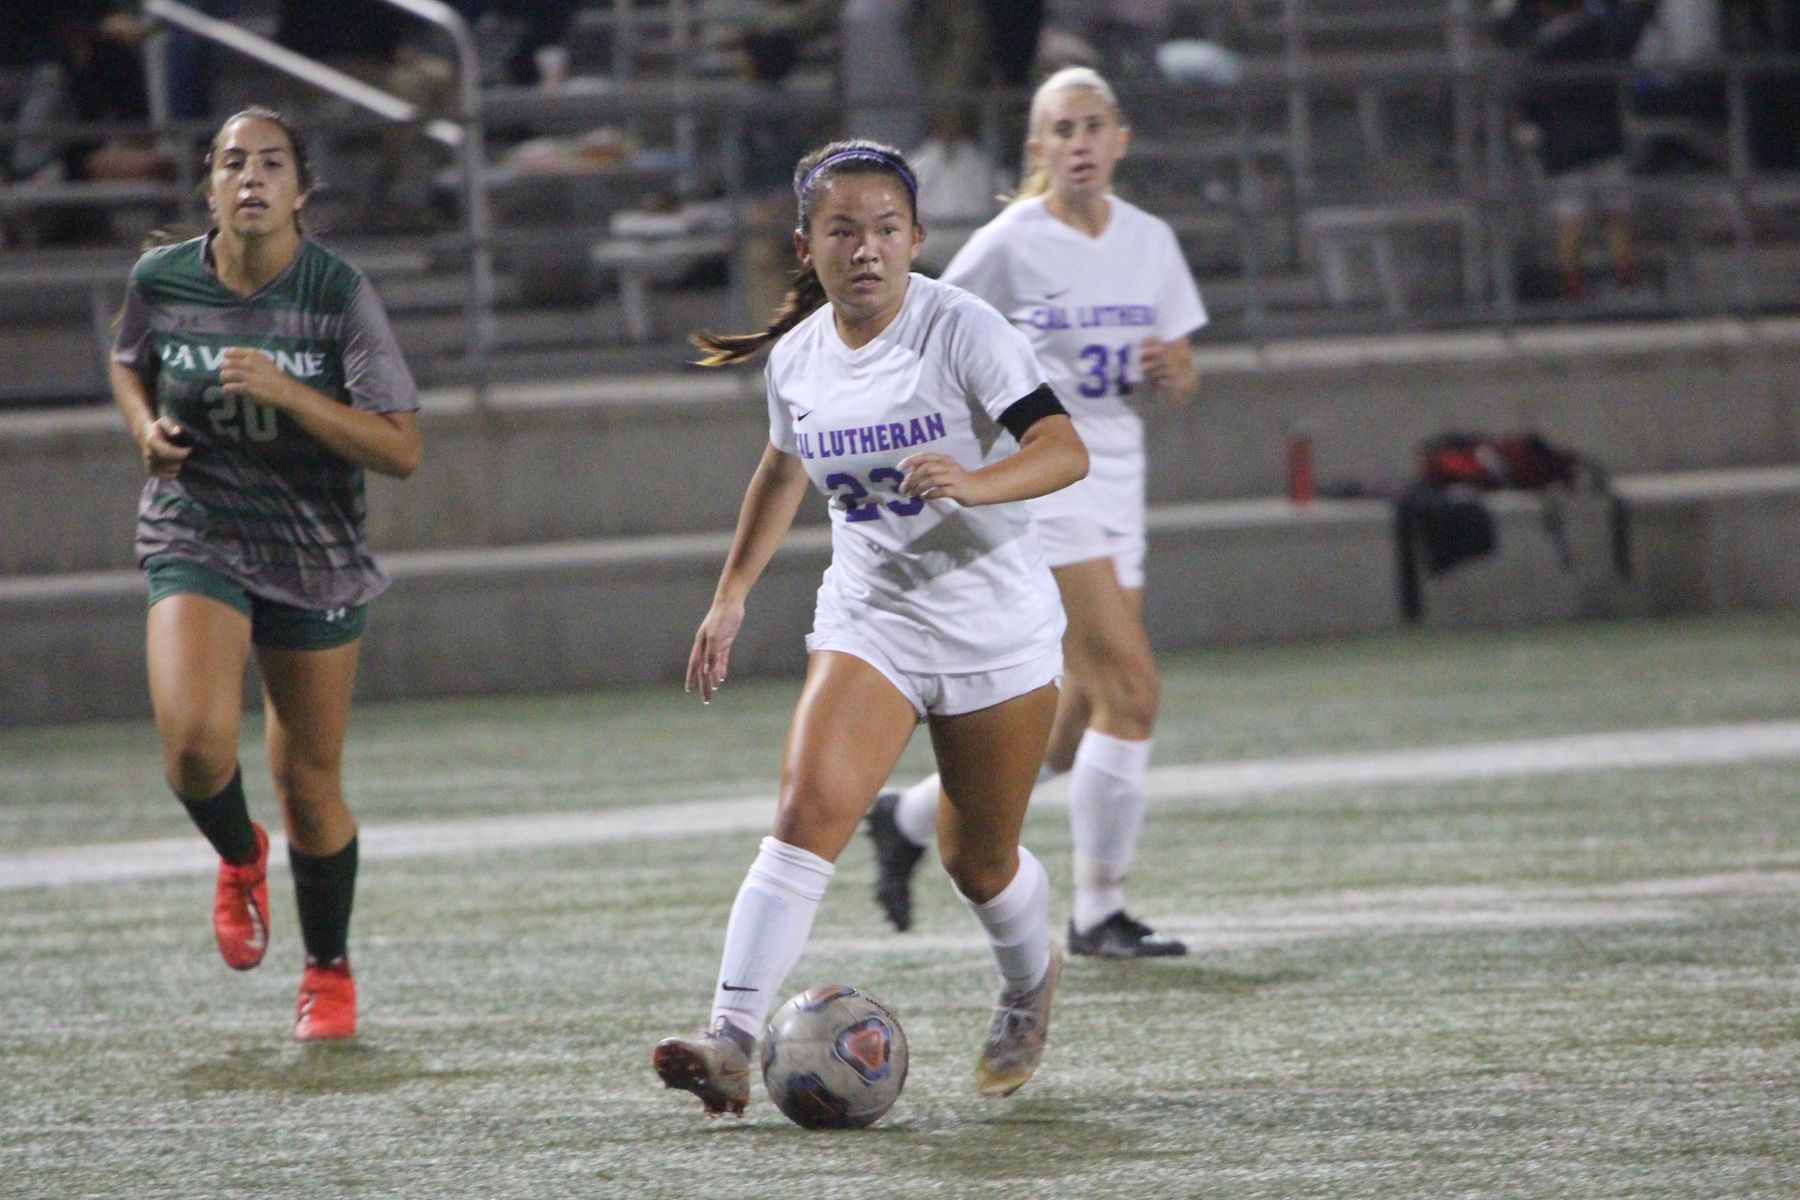 Regals Cruise to 3-0 Victory Over Leopards